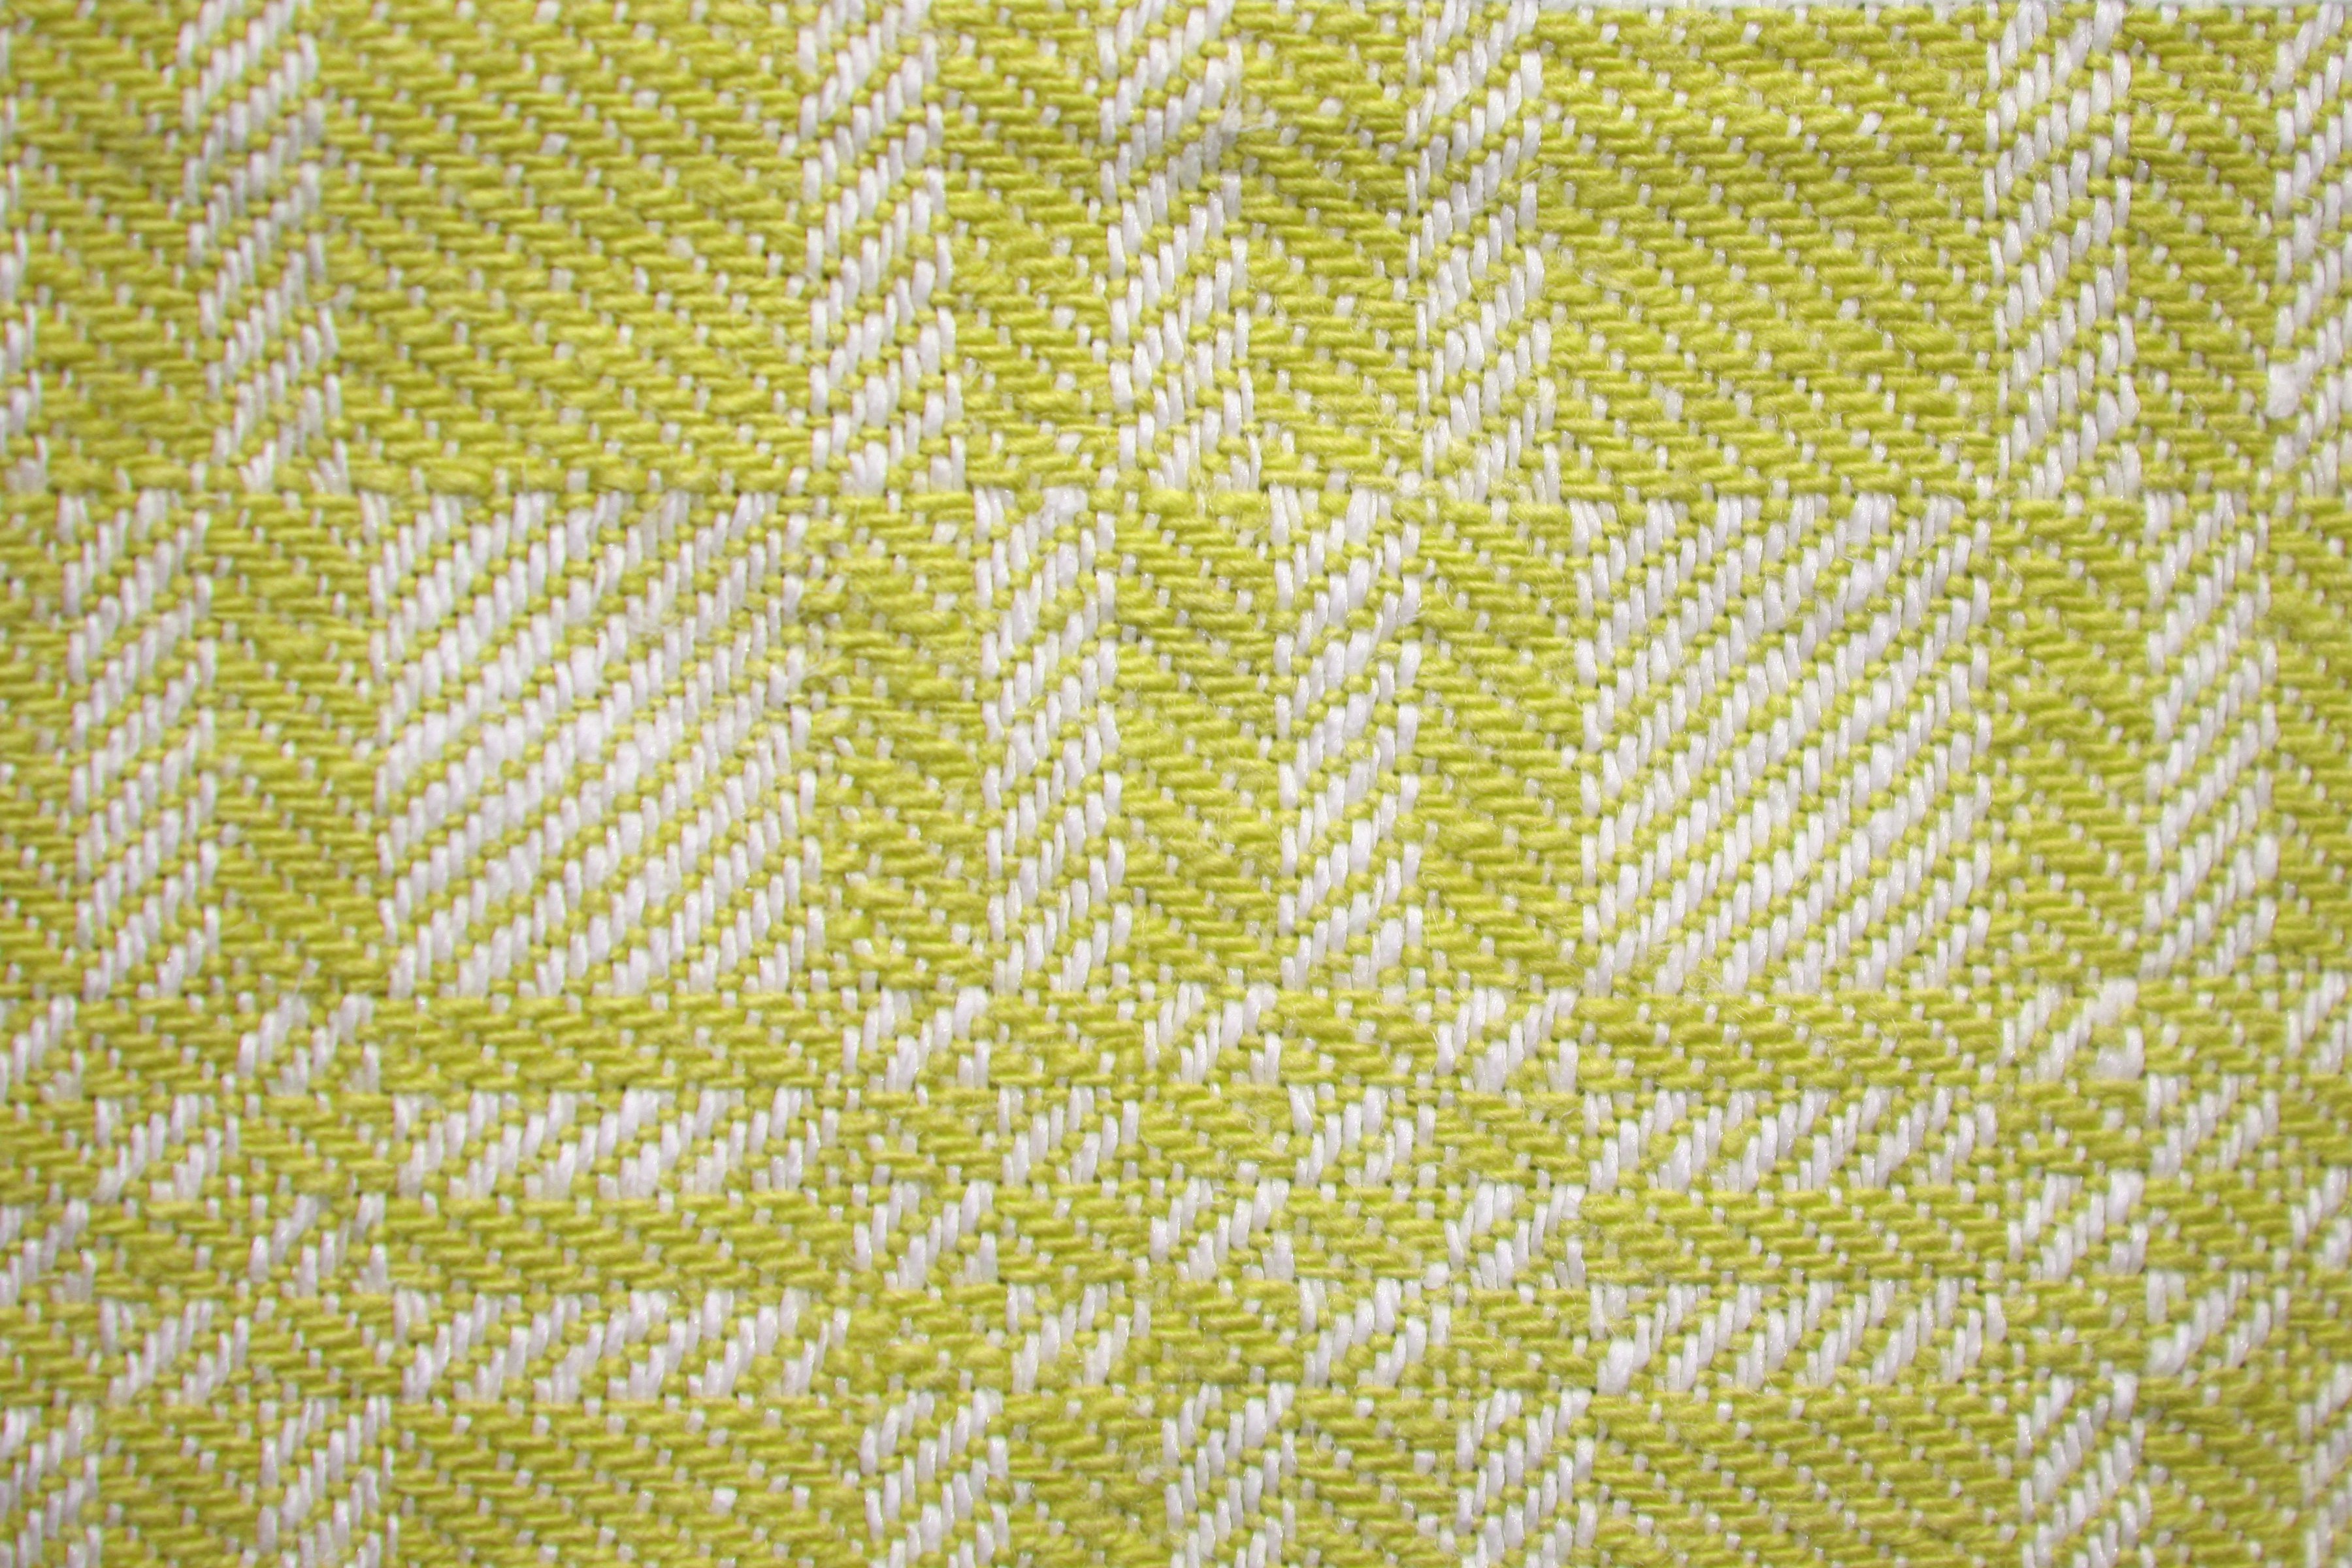 Yellow and White Woven Fabric Texture with Squares Pattern Picture ...